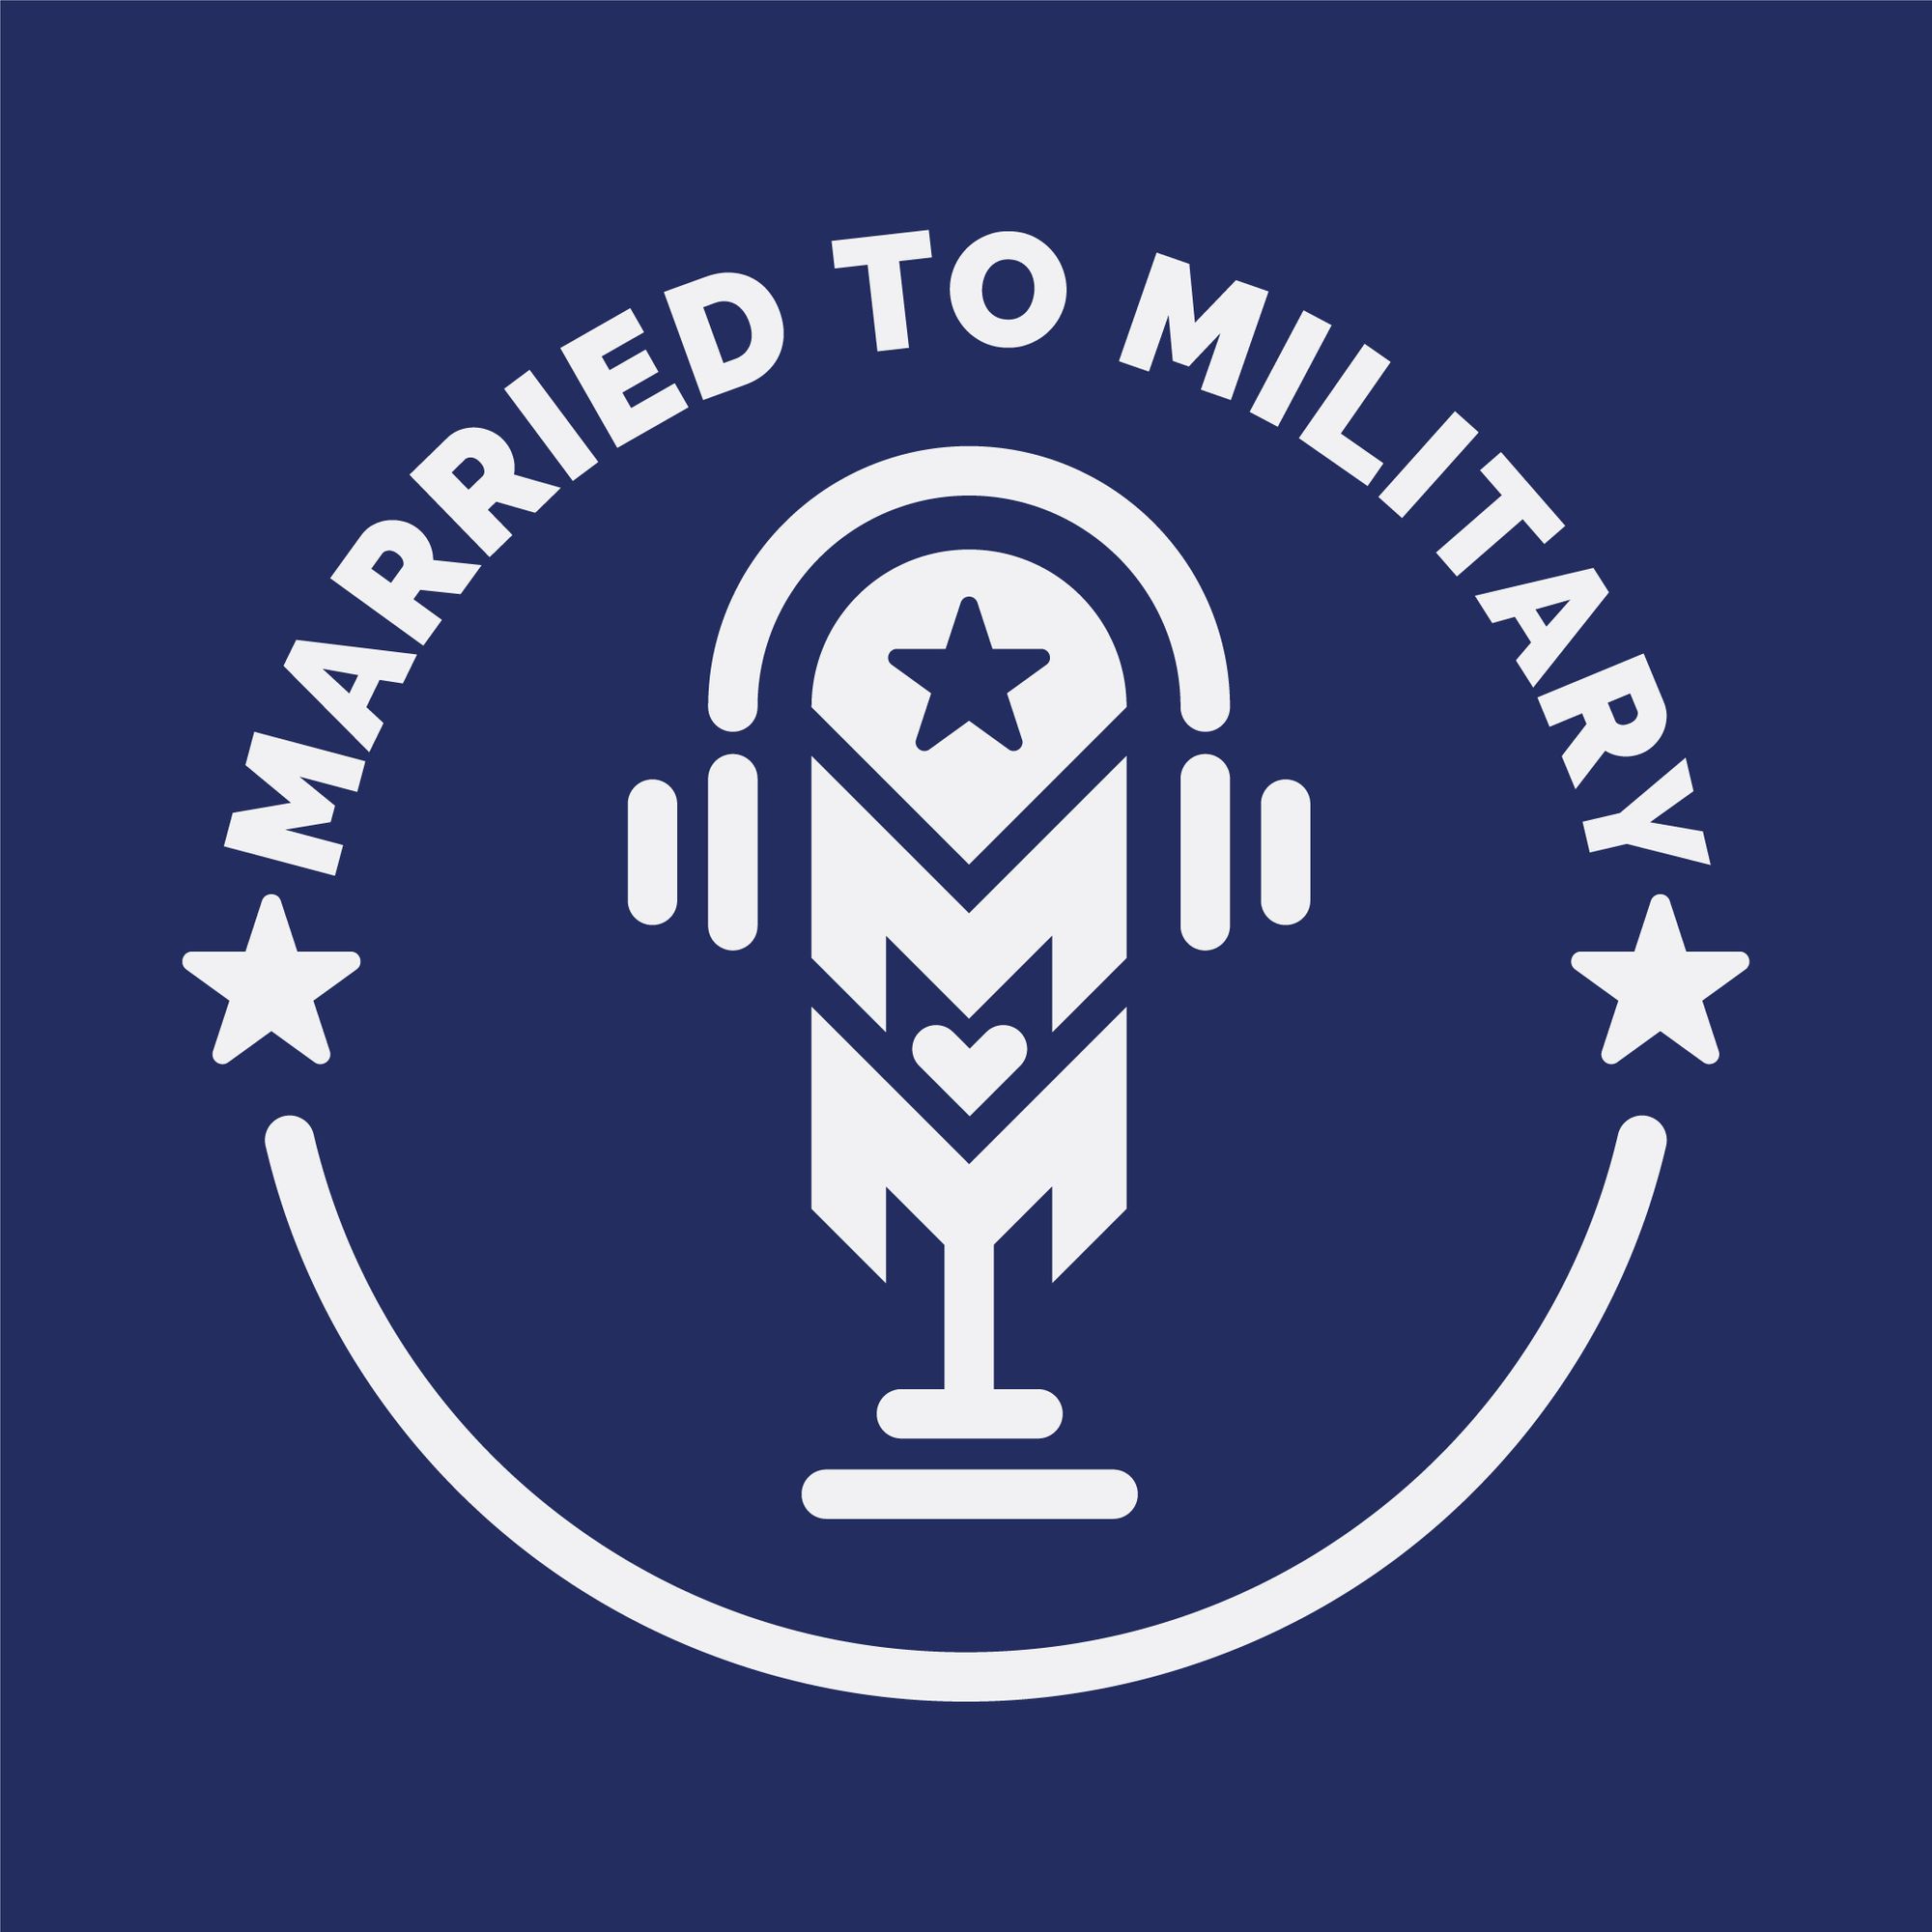 #GoSoloStories: Married to Military